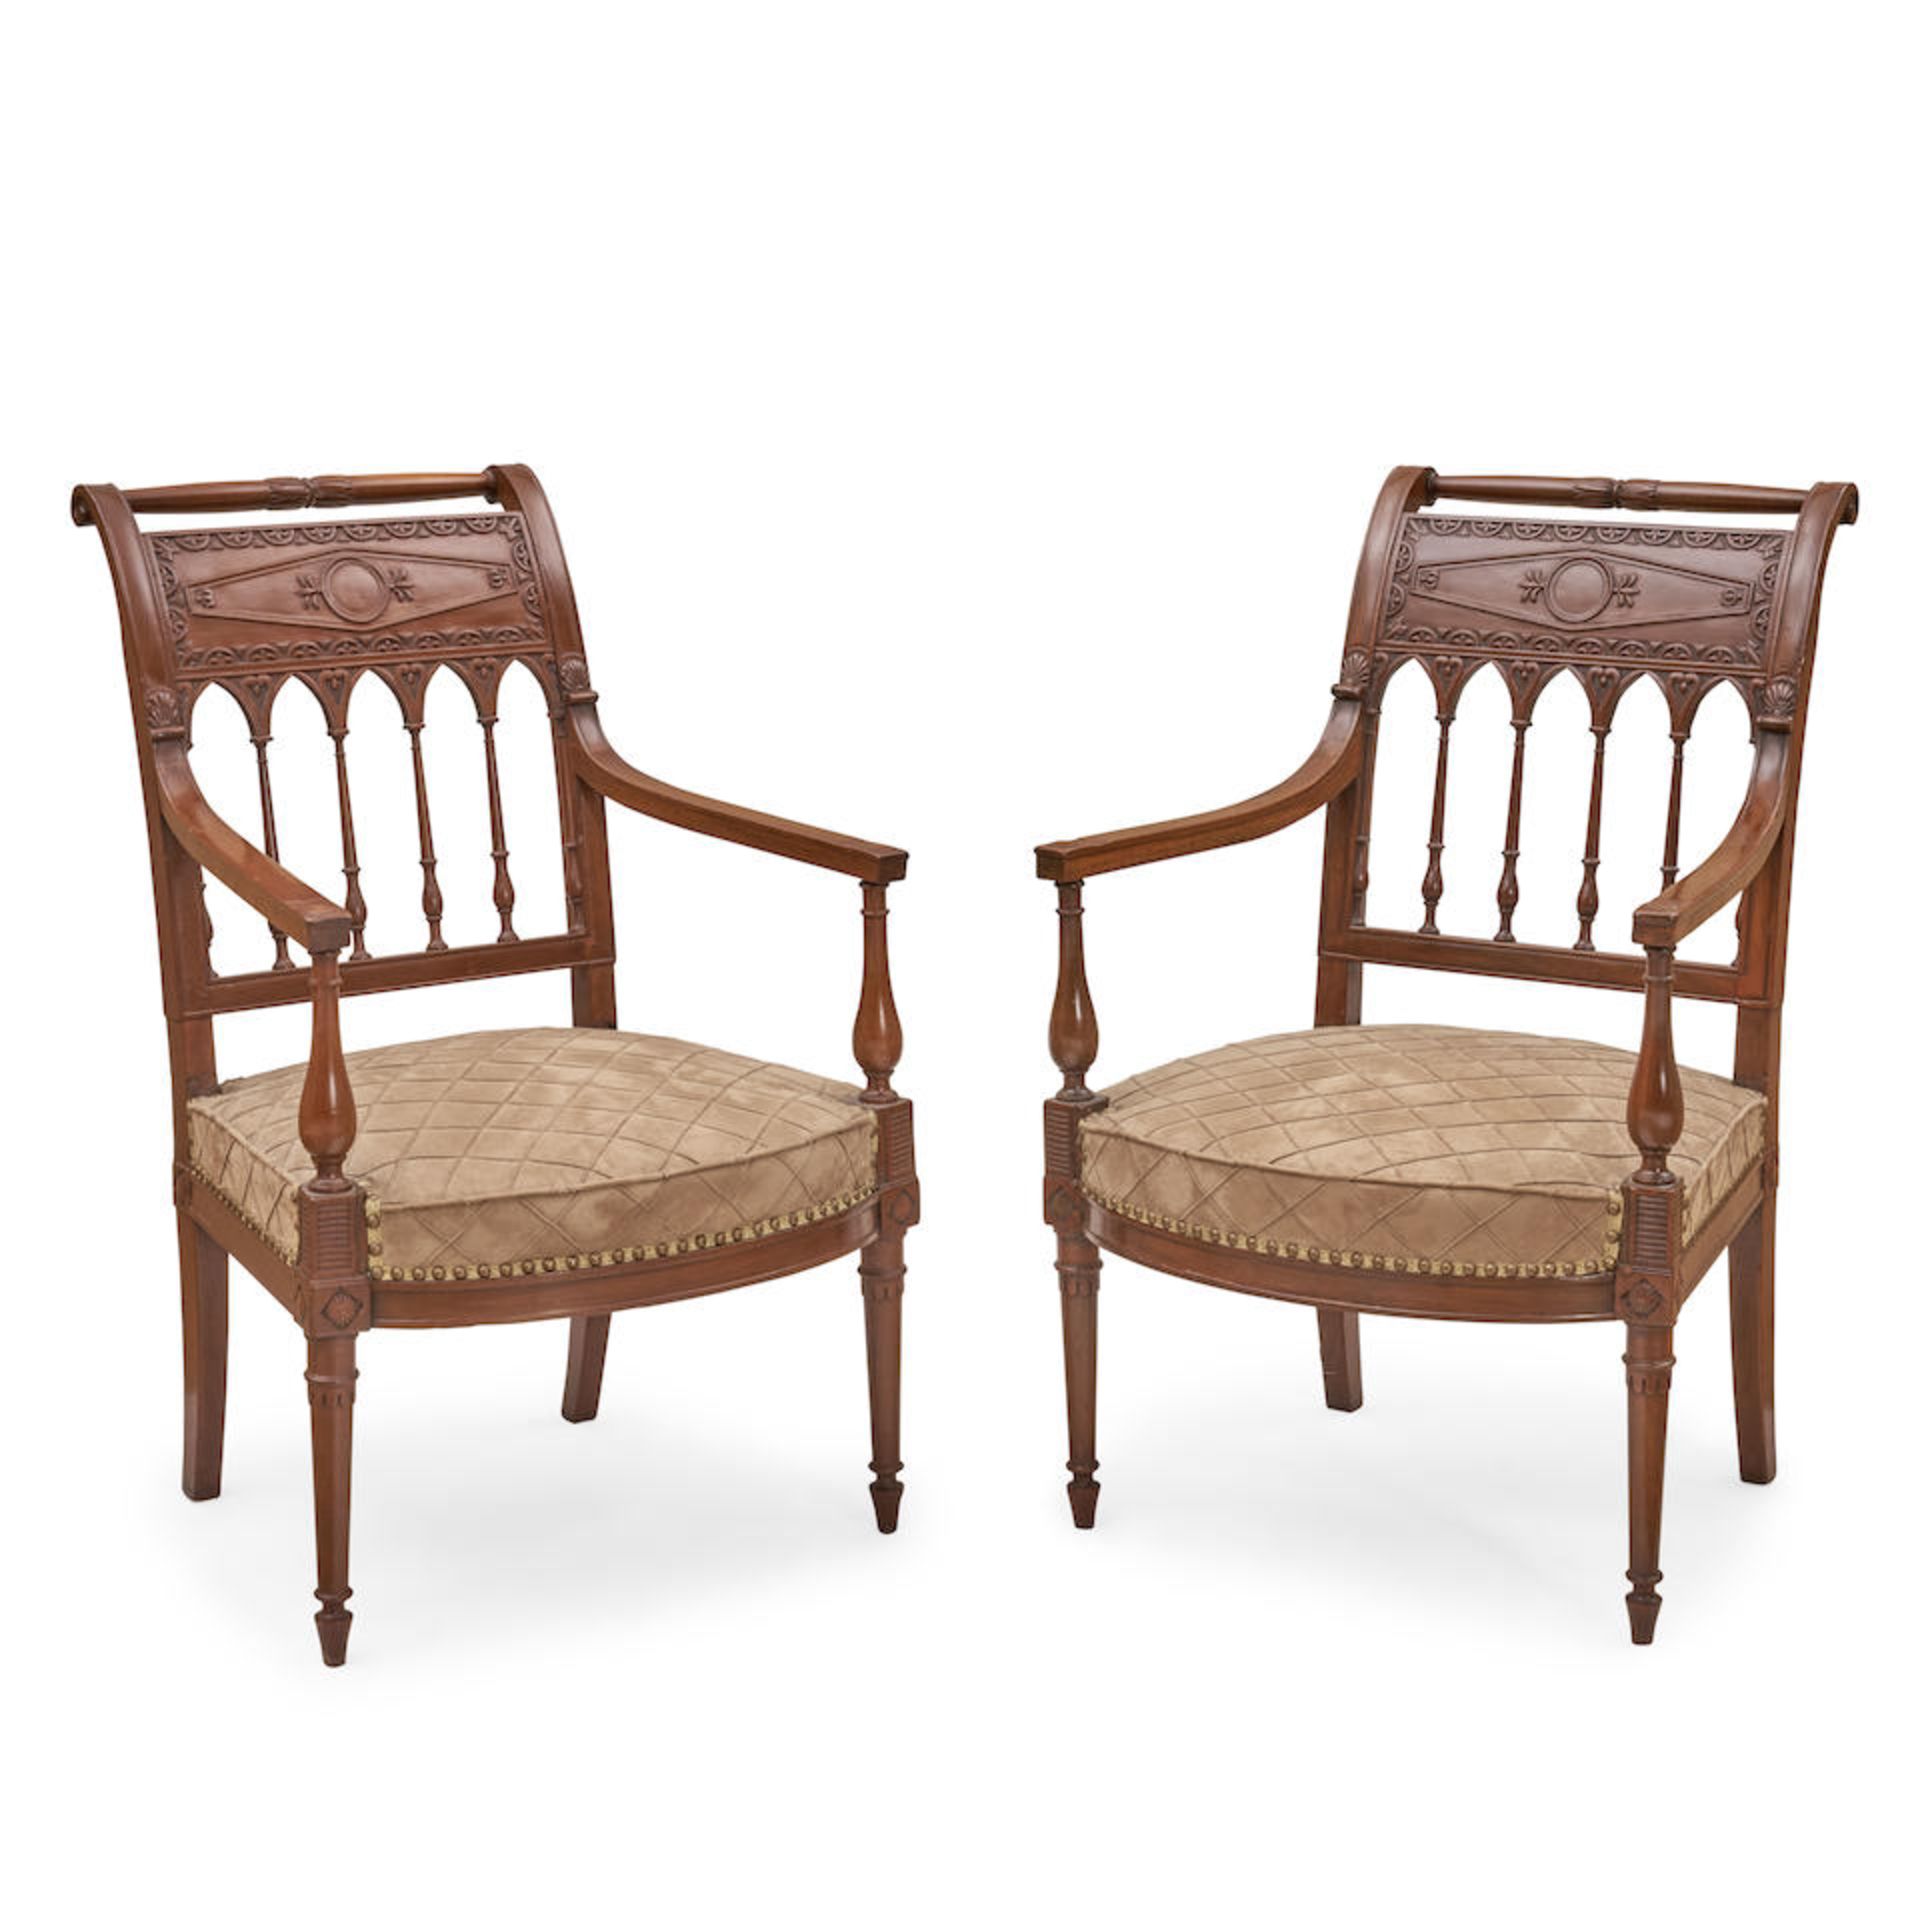 Pair of Directoire Mahogany Fauteuils, attributed to Jean-Baptiste-Bernard Demay (1759-1848; ma&...